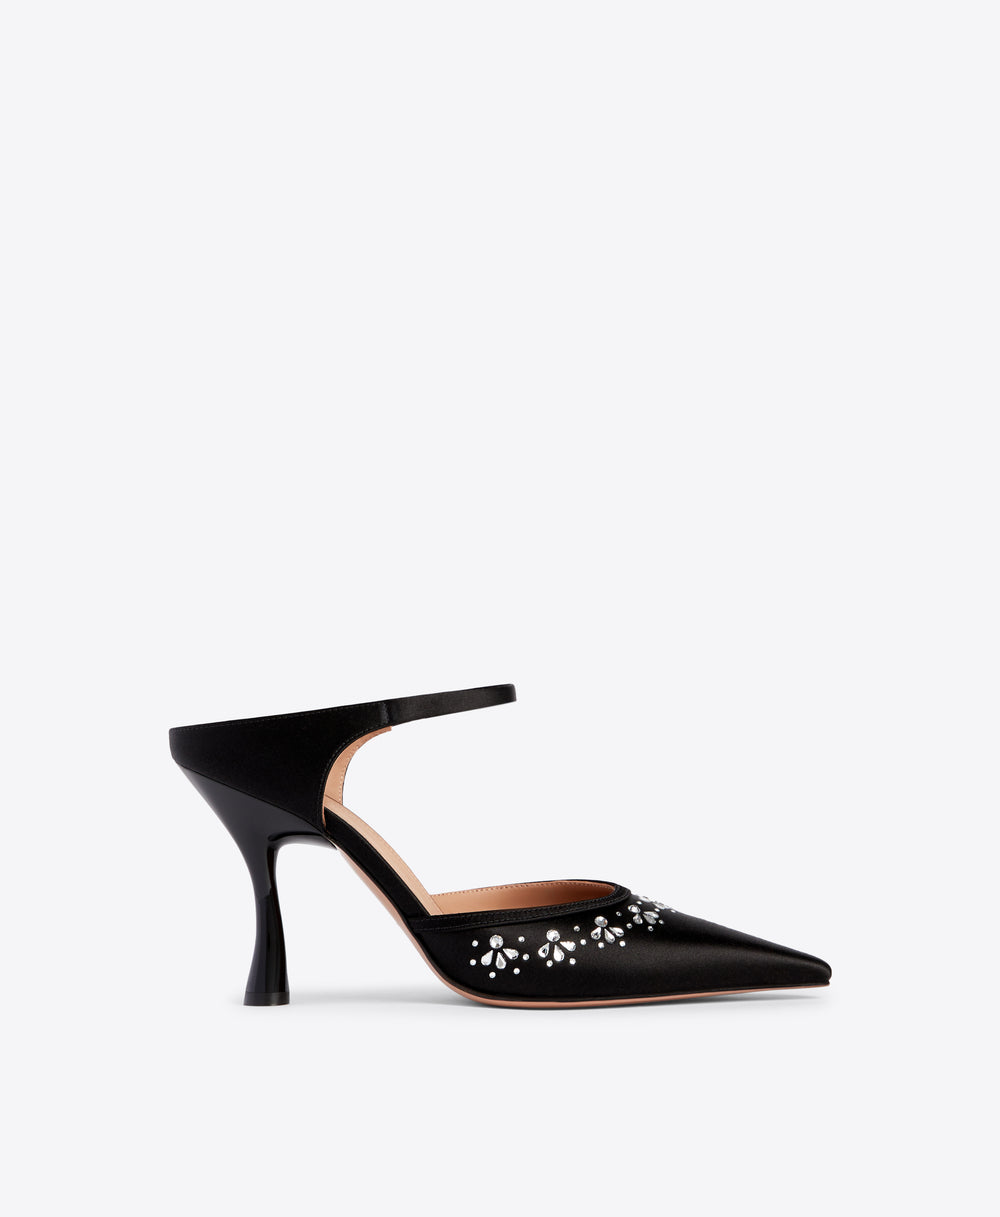 Cassie 90 Black Satin Heeled Mules Malone Souliers